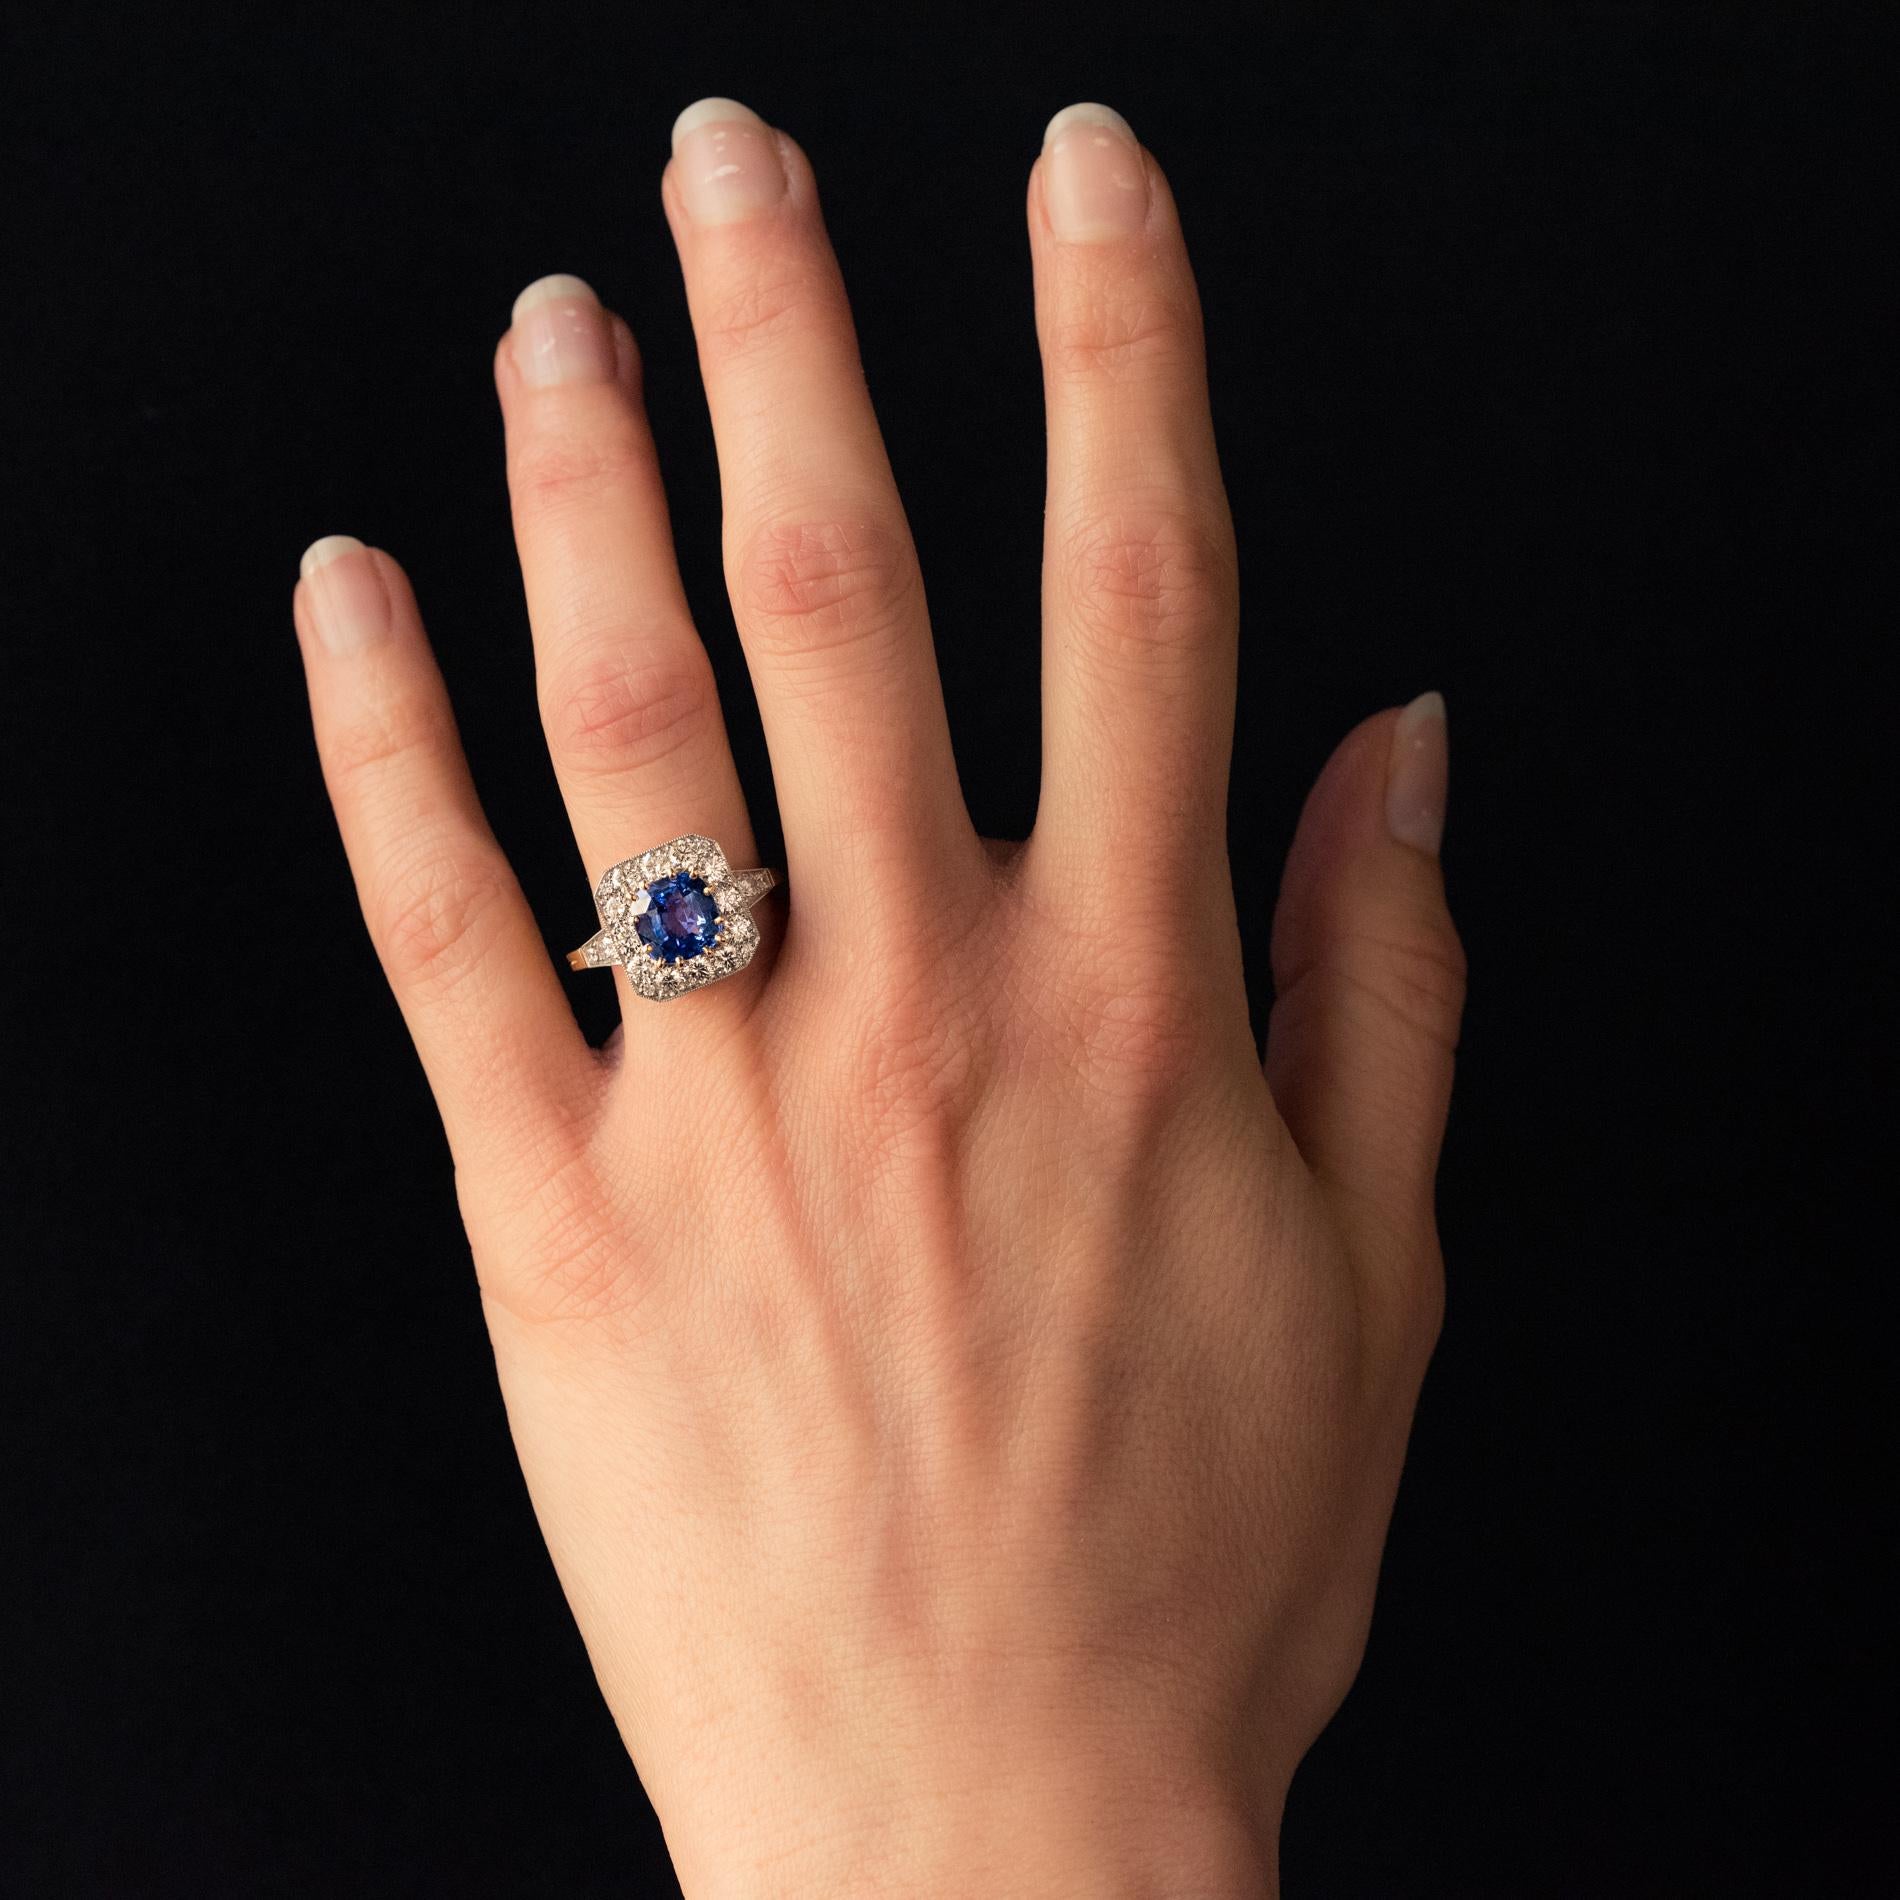 Ring in 18 karat yellow gold, and platinum, eagle's head and dog's head hallmarks.
It is set in the center of a cushion-cut sapphire on a square decor set with 16 modern brilliant-cut diamonds. On both sides, on the start of the ring are set 2 x 2